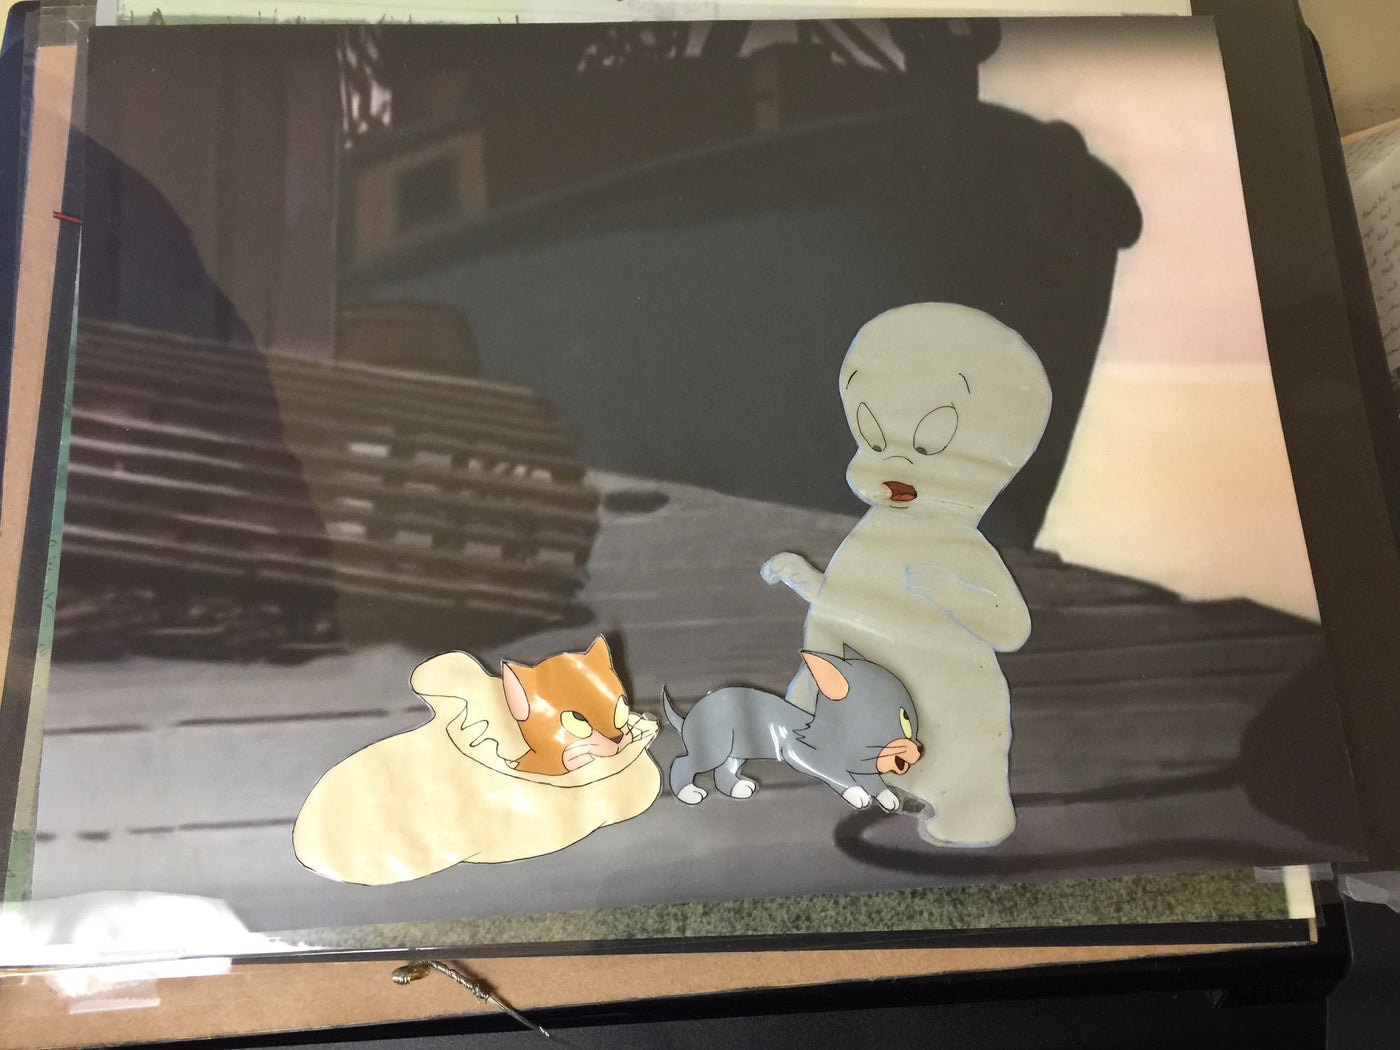 Original Famous Studios for Paramount Pictures Production Cel from Casper the Friendly Ghost